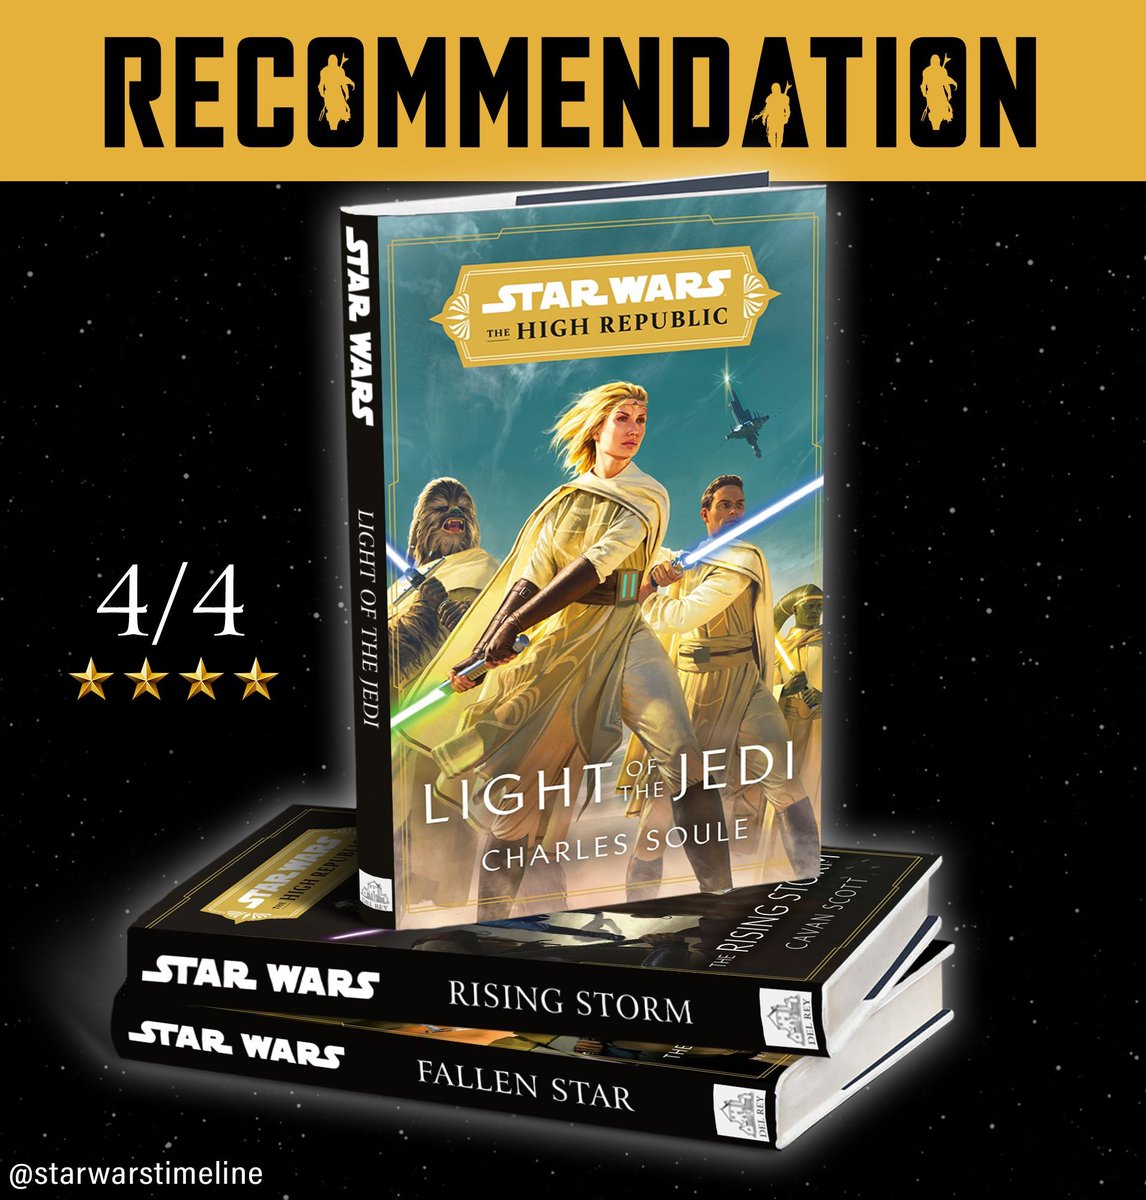 Thank you @cavanscott @justinaireland @CharlesSoule @djolder @claudiagray for giving us some of the most exciting #StarWars stories in recent years. As old-school EU fan I'd recommend this series to any fan in a heartbeat.